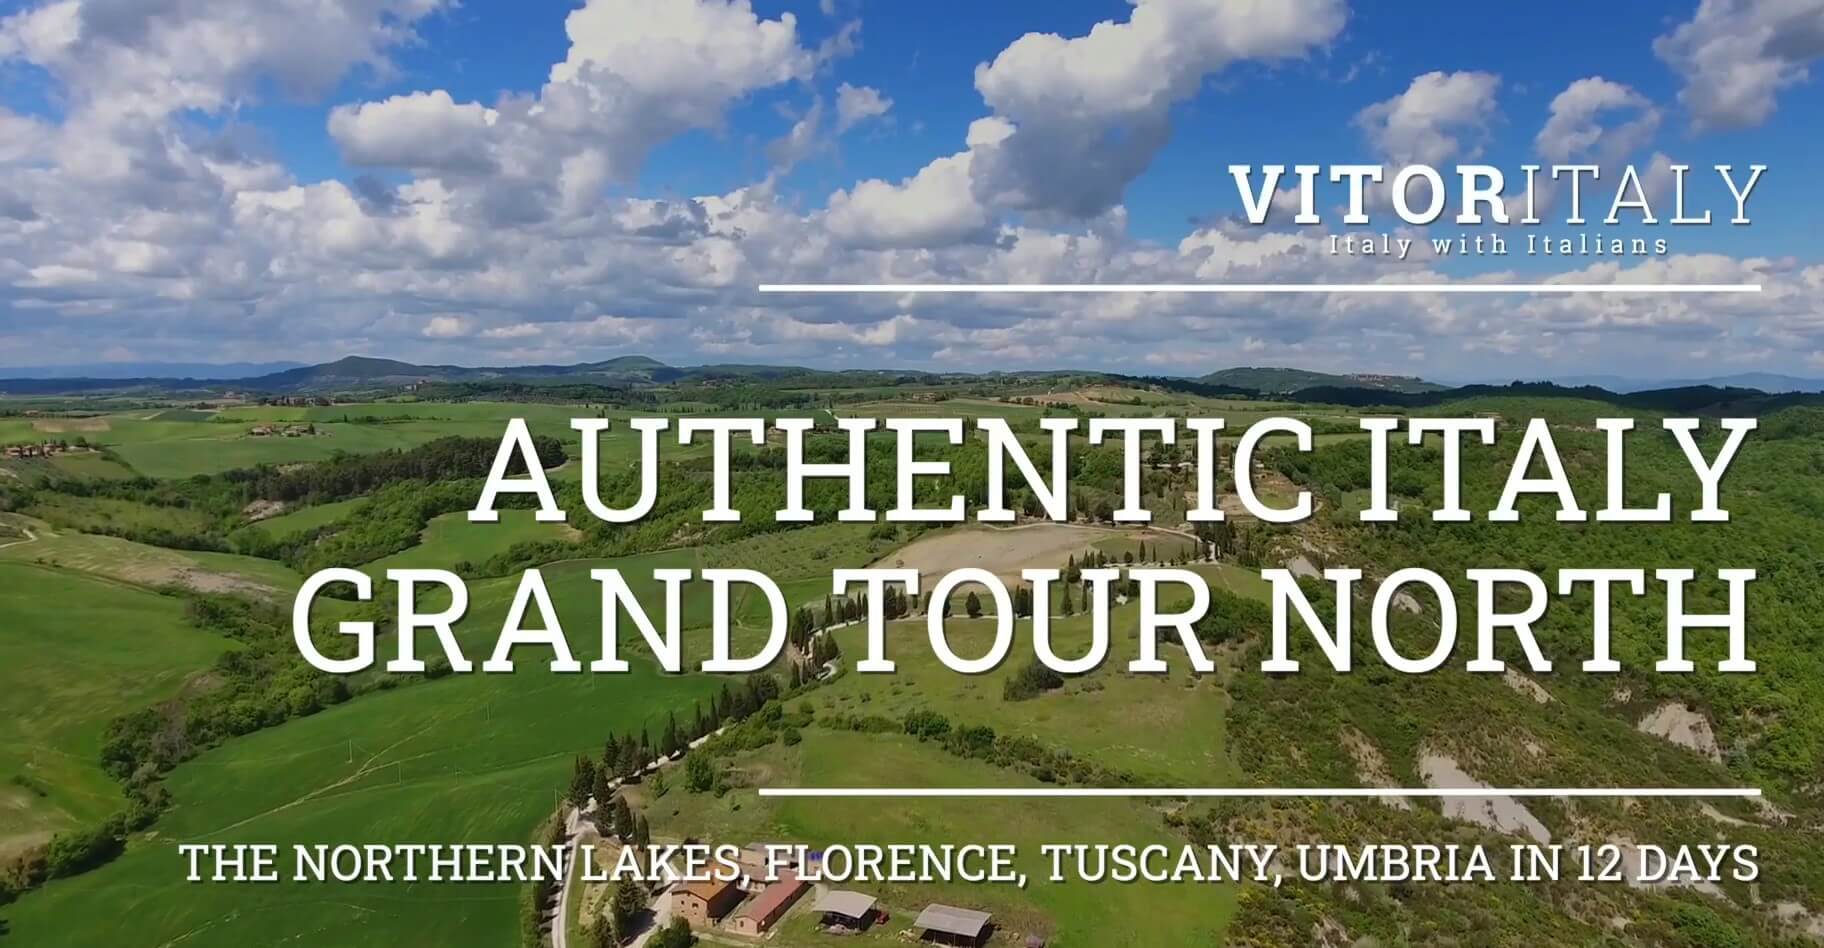 AUTHENTIC ITALY PRIVATE TOUR NORTH - The Northern Lakes, Emilia, Florence, Tuscany, Umbria 